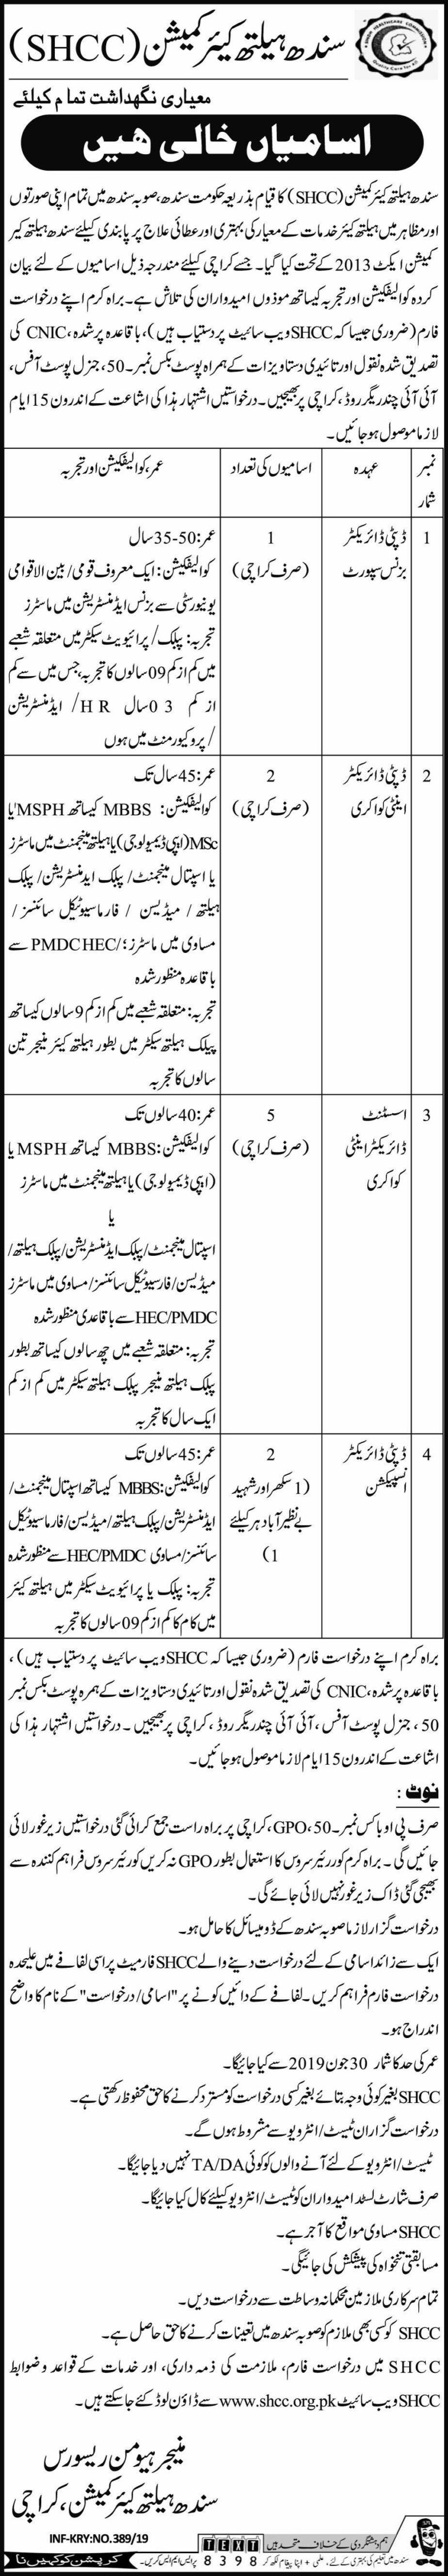 Sindh Health Care Commission (SHCC) Jobs 2019 for 10+ Admin / Management Posts